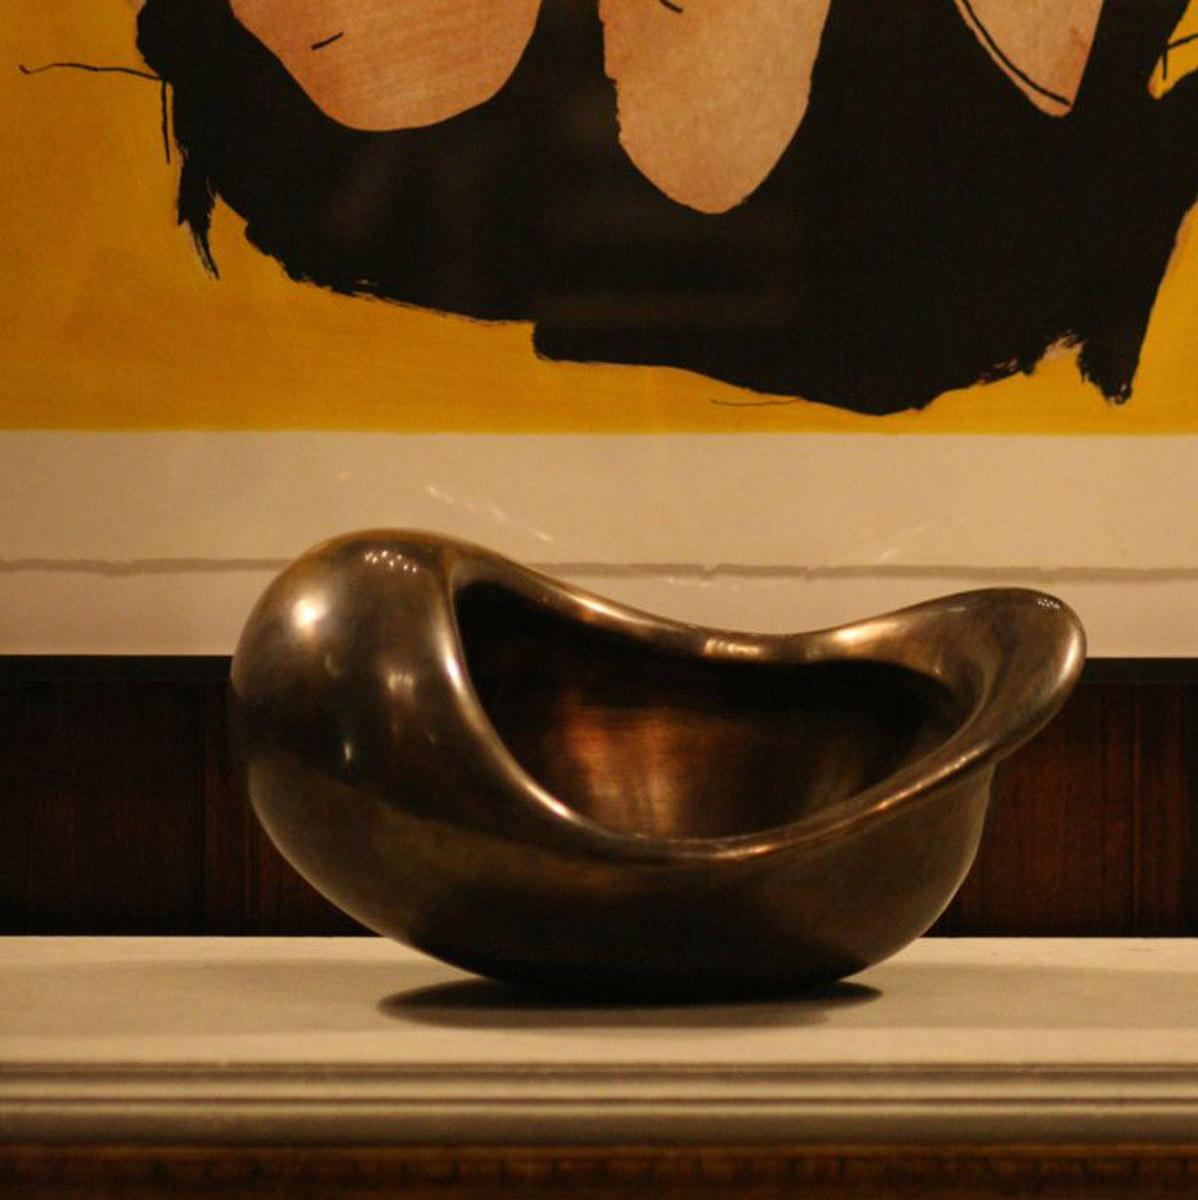 Jordan Mozer (b.1958) The East Bowl. Polished and patinated cast red-bronze. Made in Chicago for the East Hotel in Hamburg, Germany in 2004. Collection of the artist. Signed. Measurements: 19